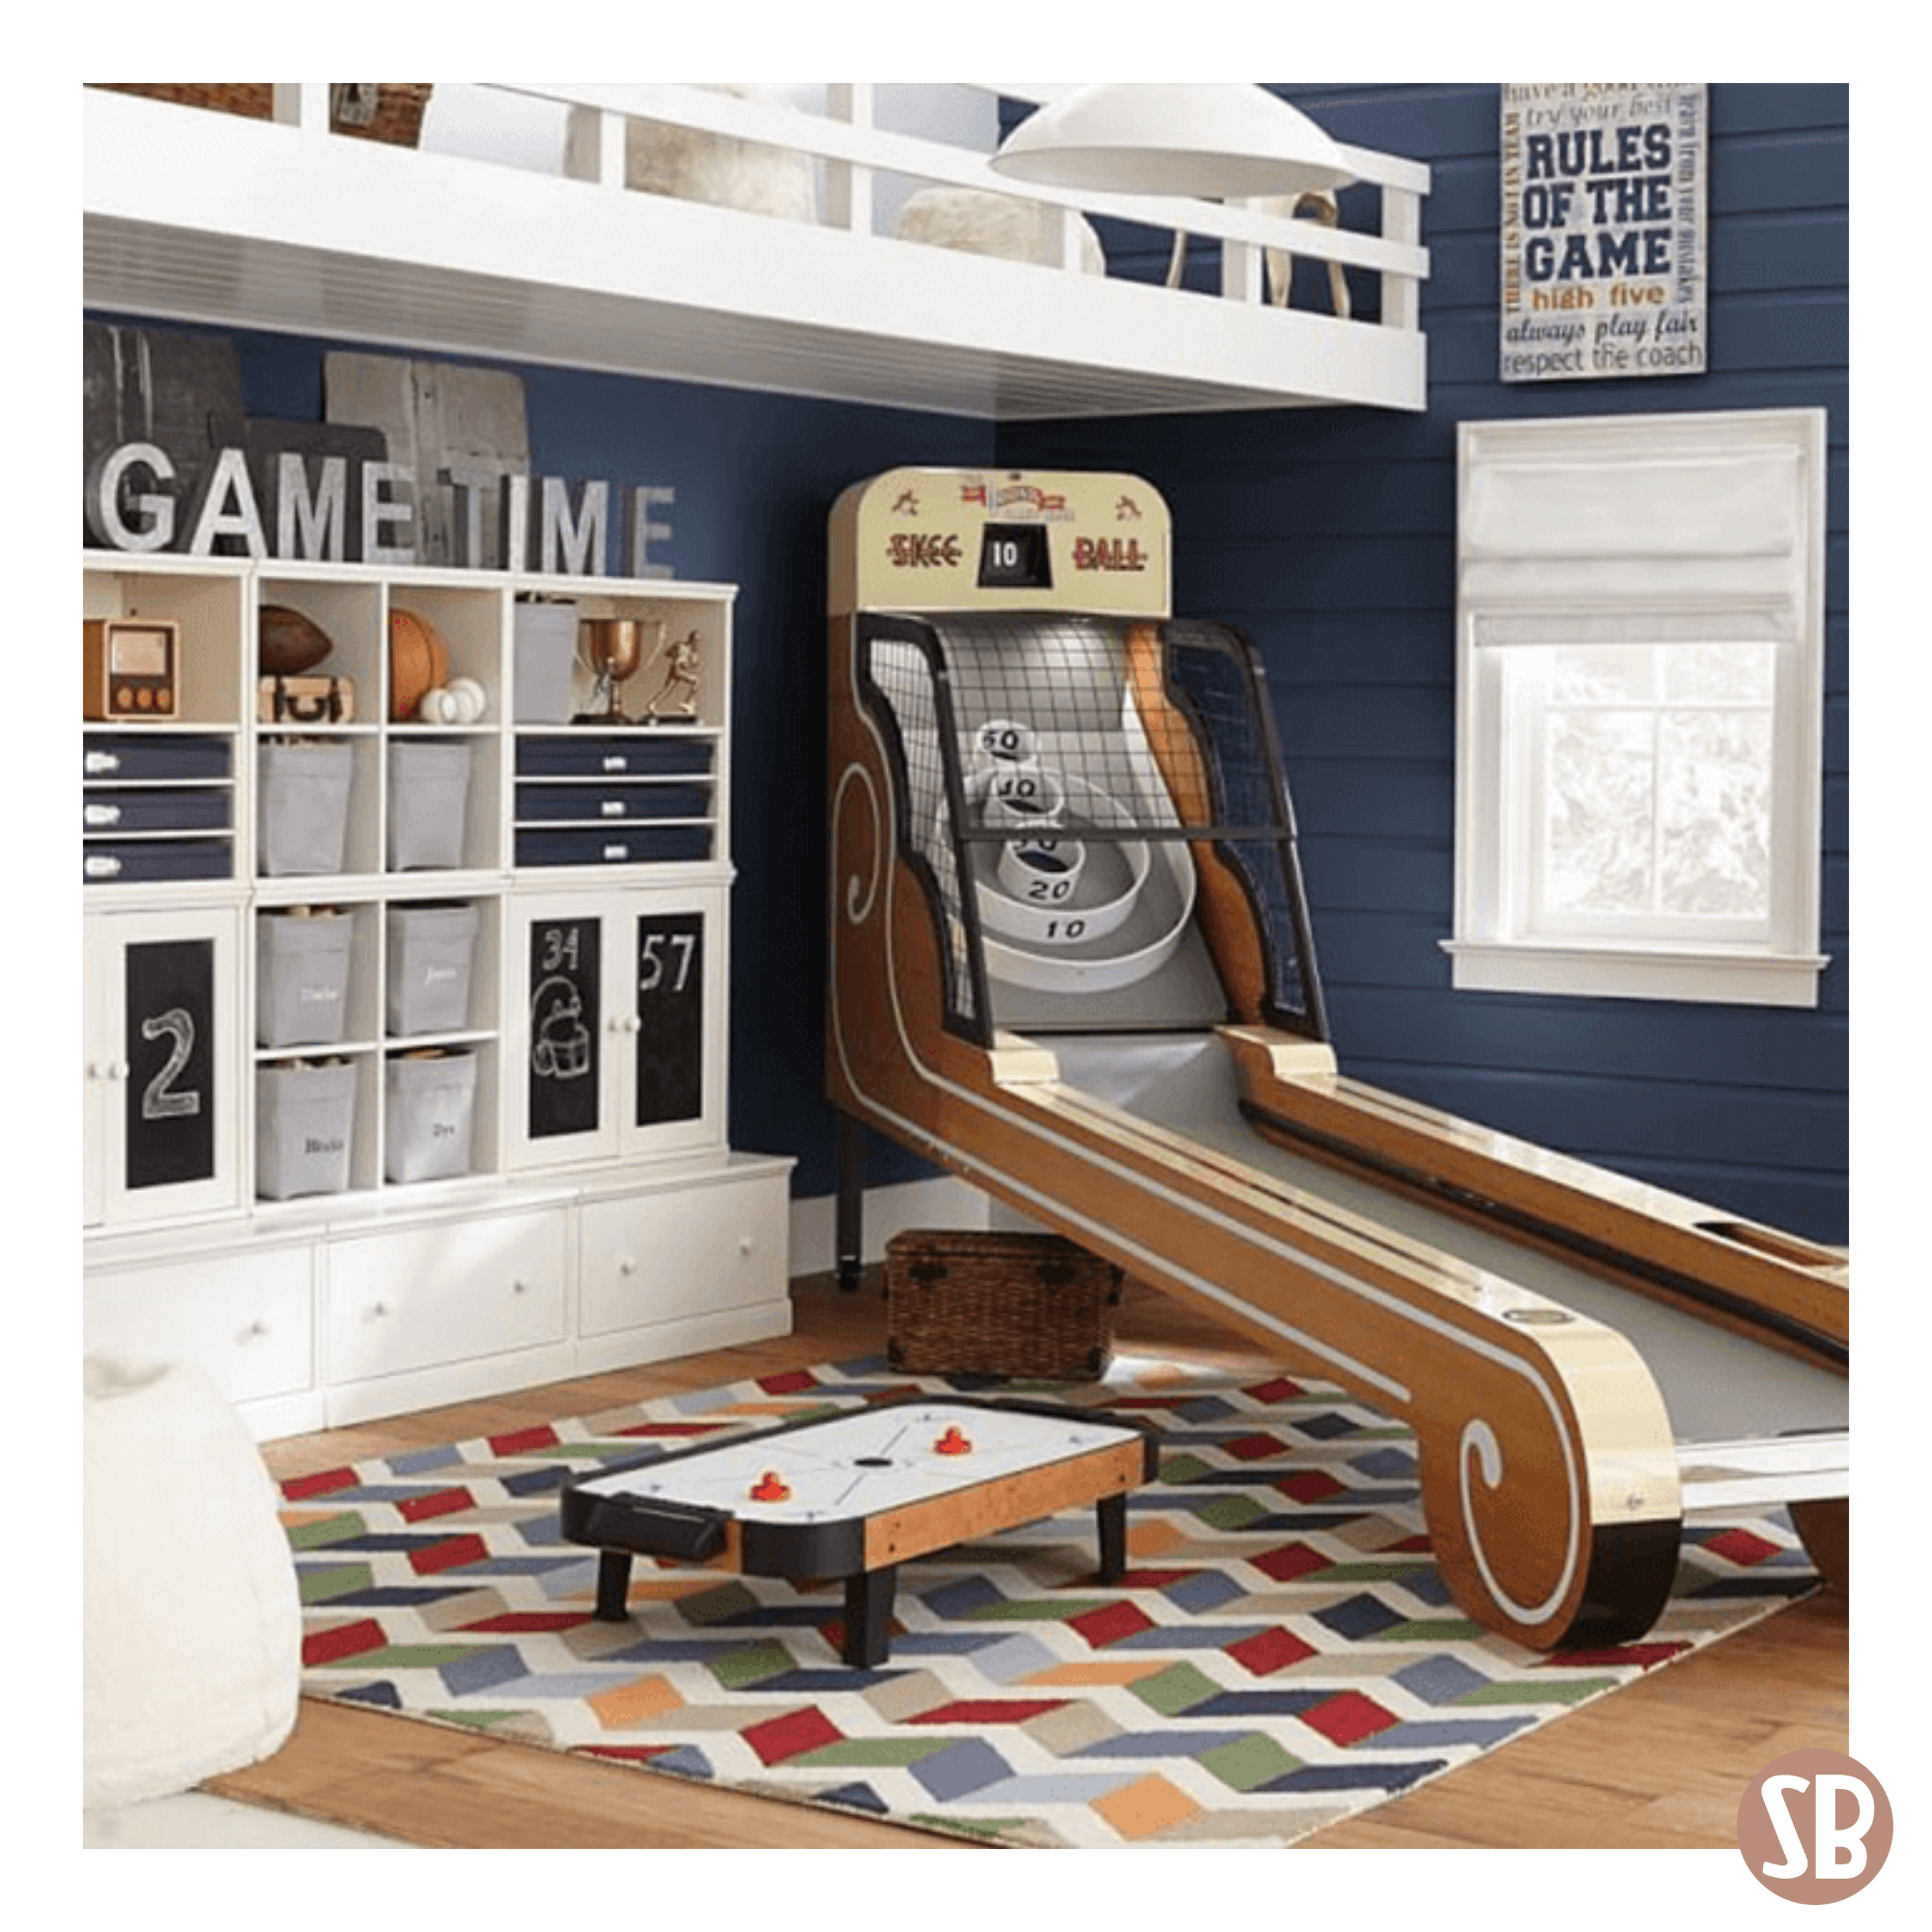 A classic Skee-Ball Home Alley machine in a multi-purpose room